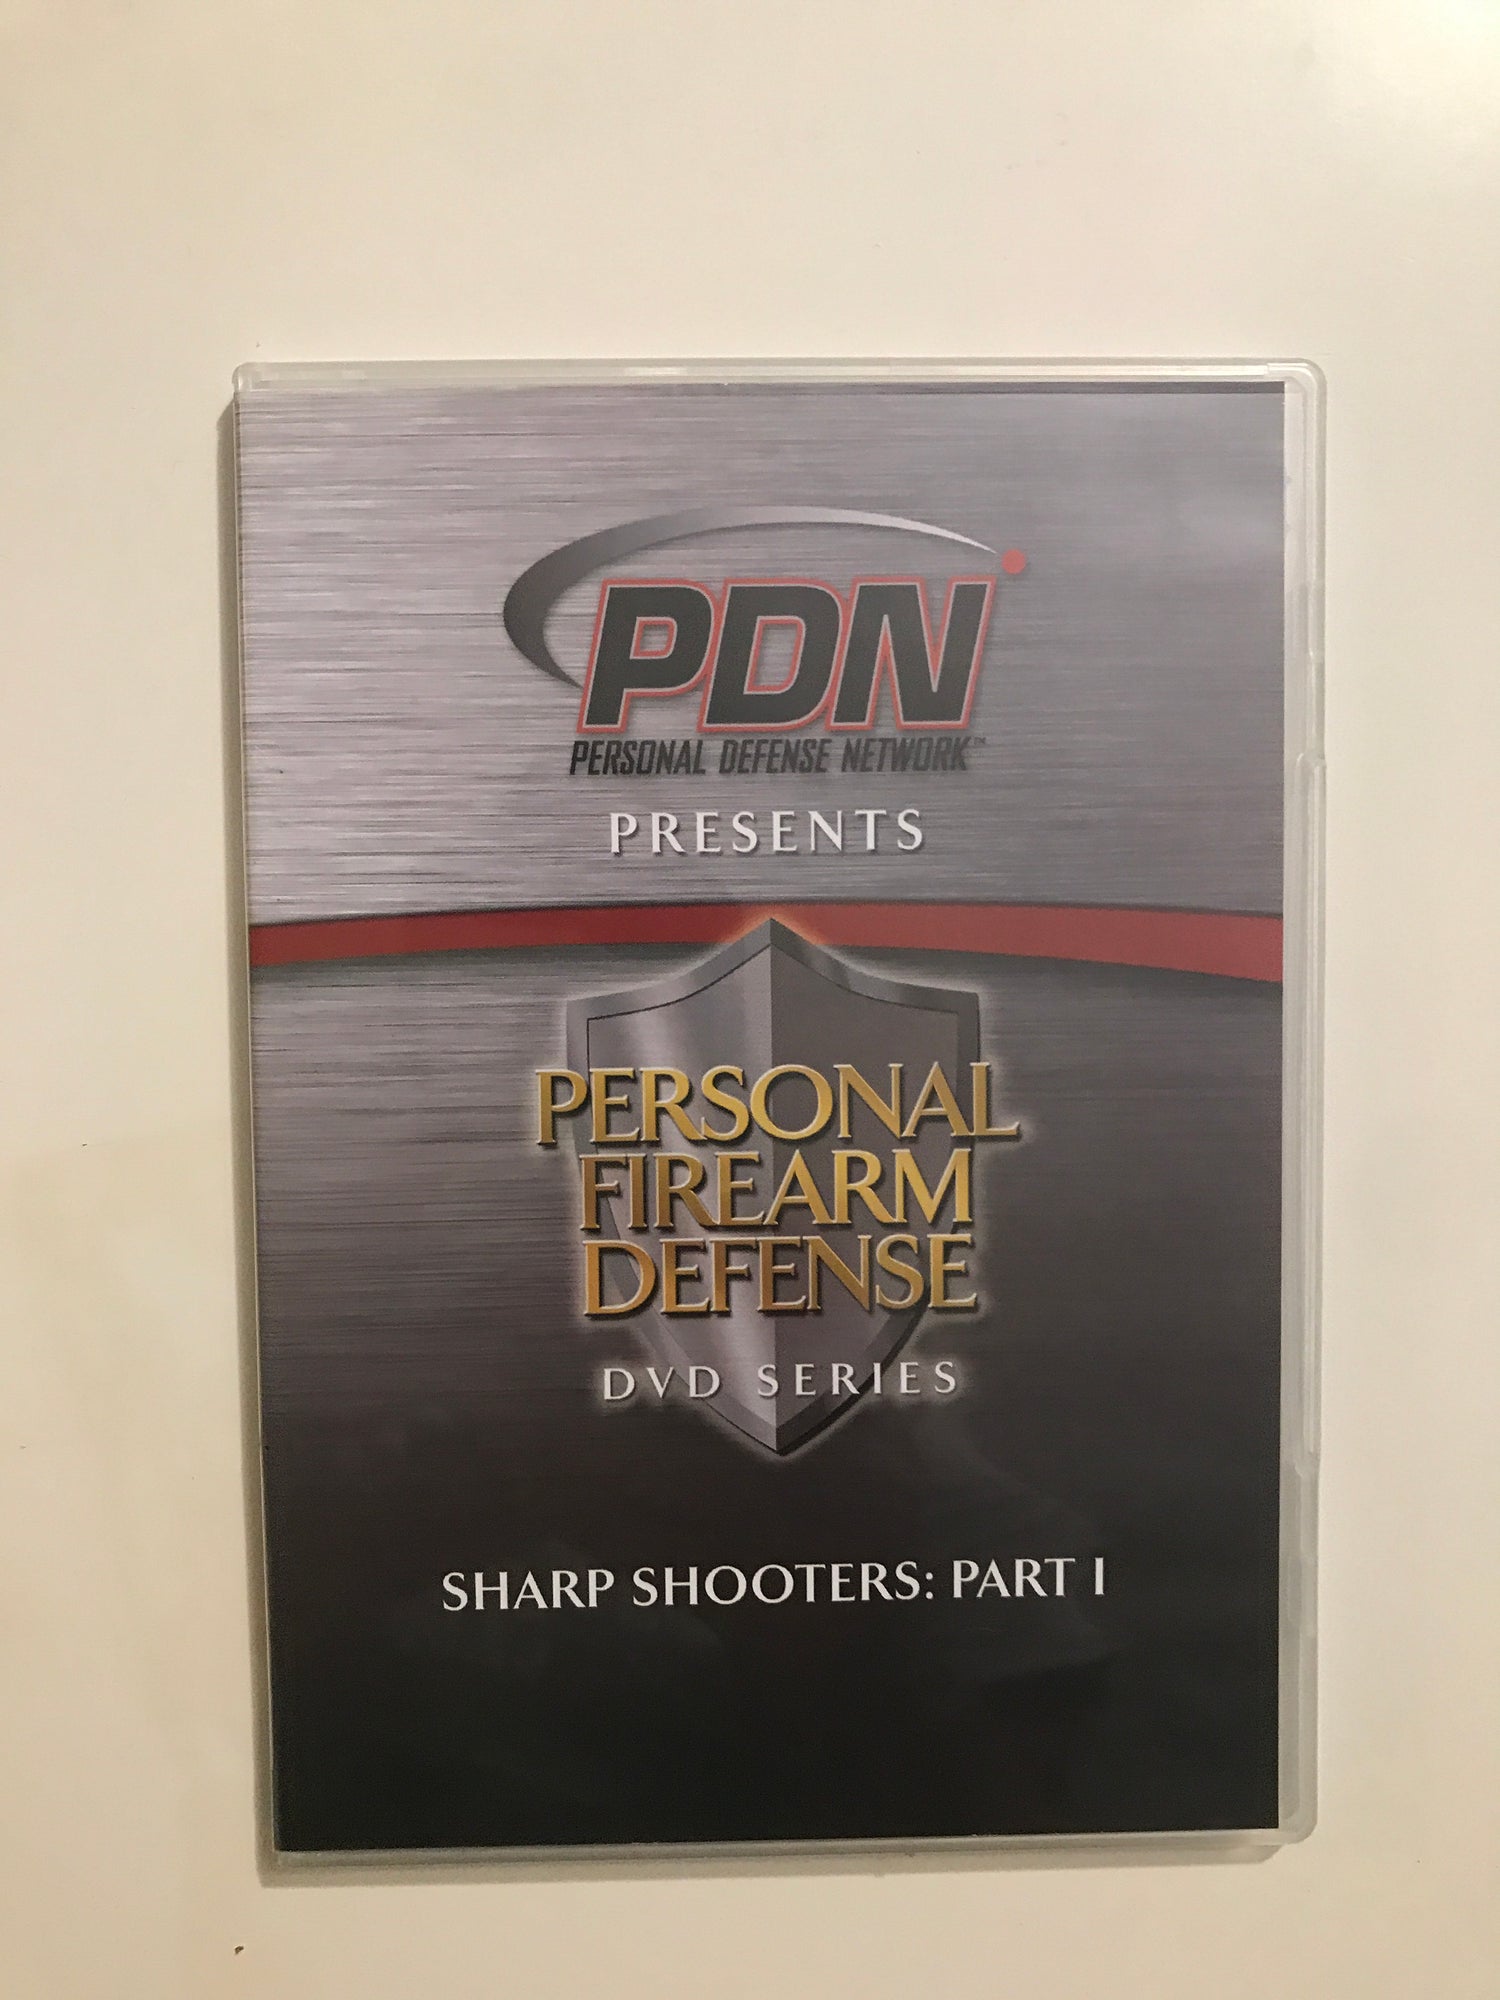 Personal Firearm Defense: Sharp Shooters Part 1 DVD by Rob Pincus (Preowned) - Budovideos